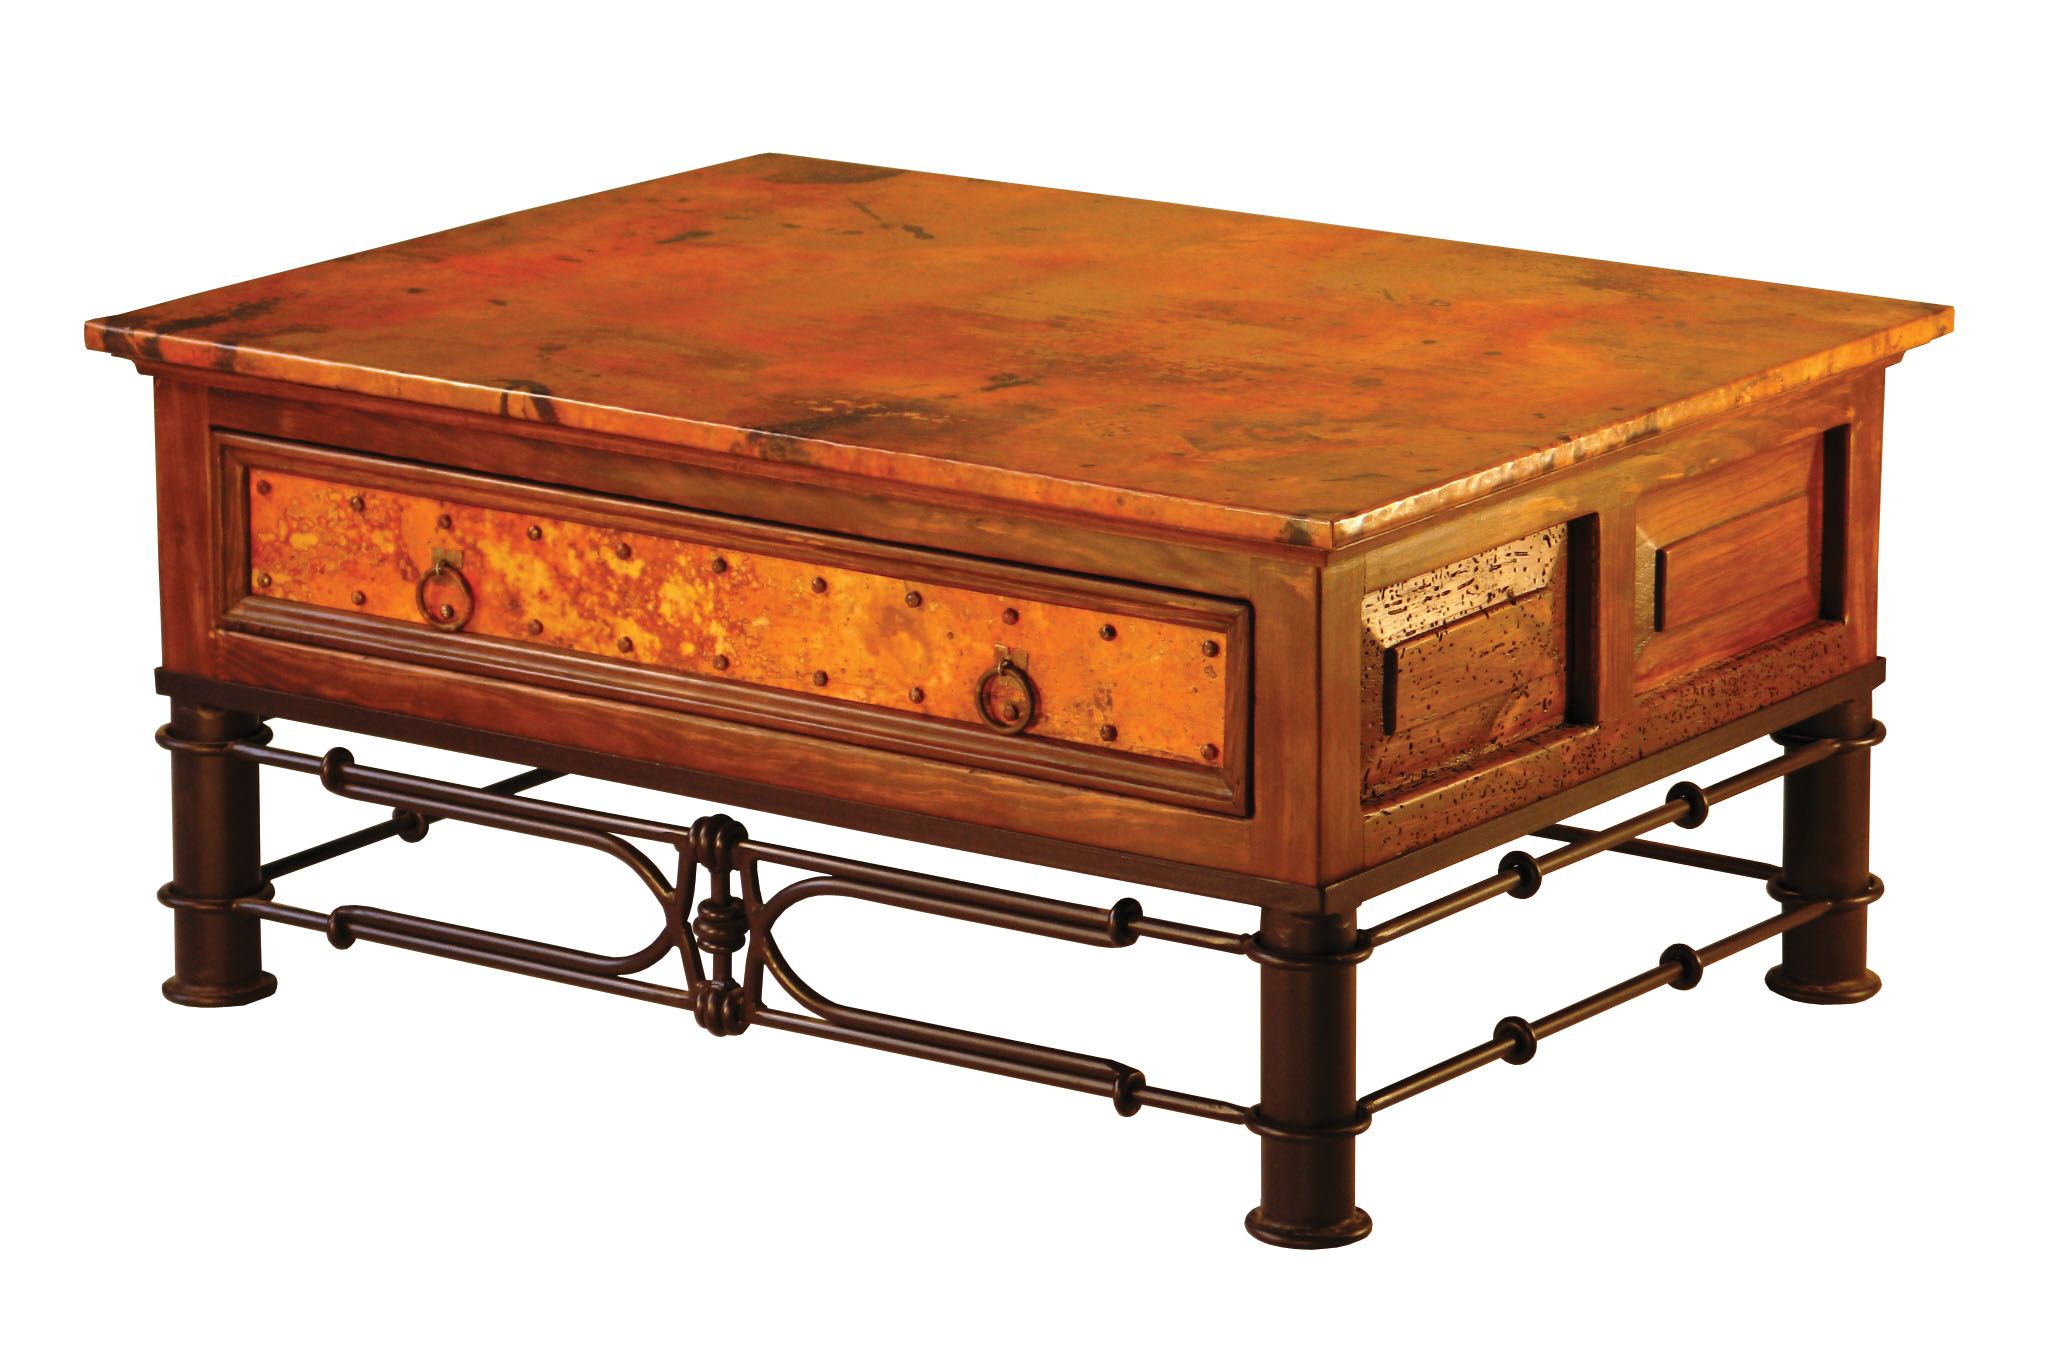 1 Drawer Coffee Table W/ Copper/pablo Base | Mr Vallarta's Throughout Metal 1 Shelf Coffee Tables (Gallery 7 of 20)